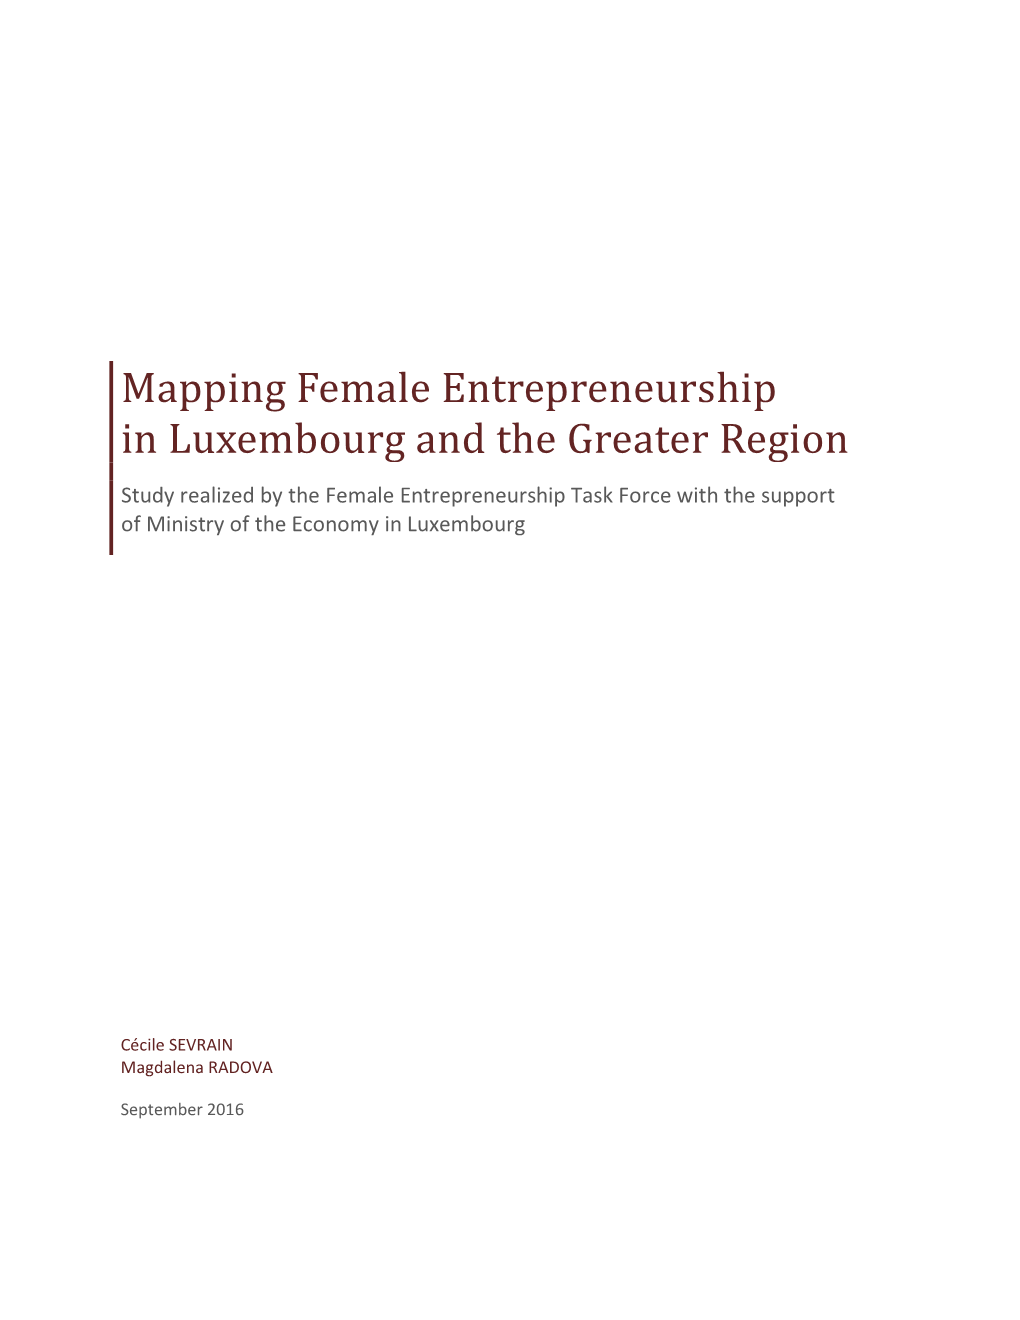 Mapping Female Entrepreneurship in Luxembourg and the Greater Region